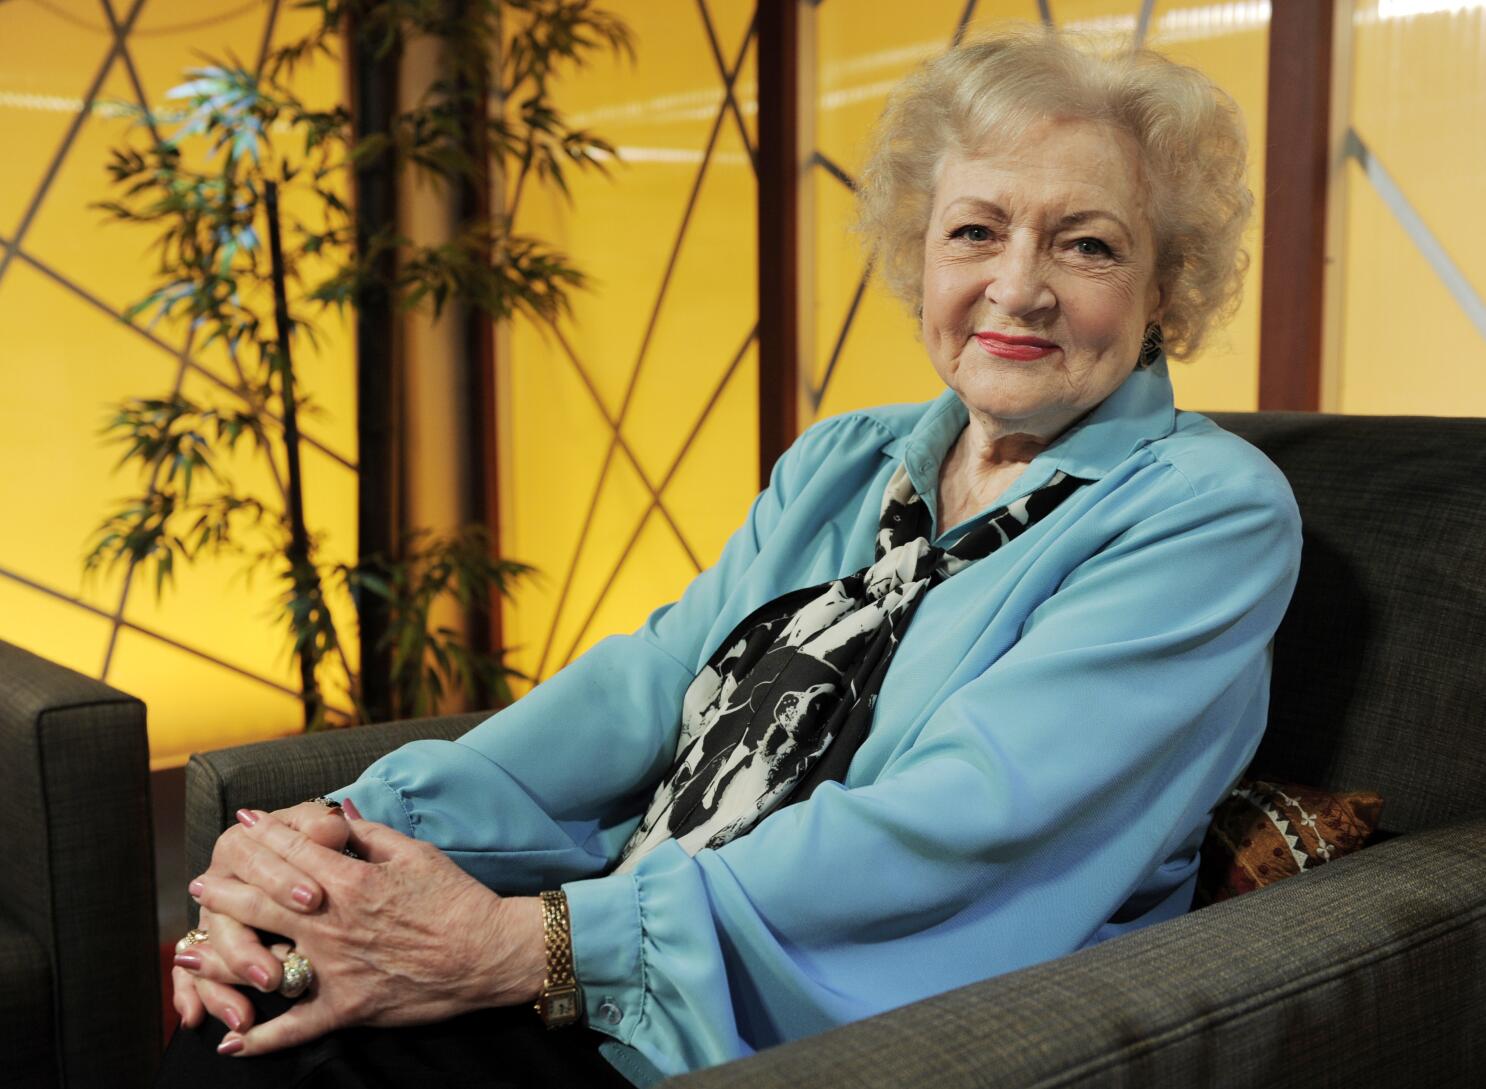 Betty White's assistant shares 'one of last' pics of late icon